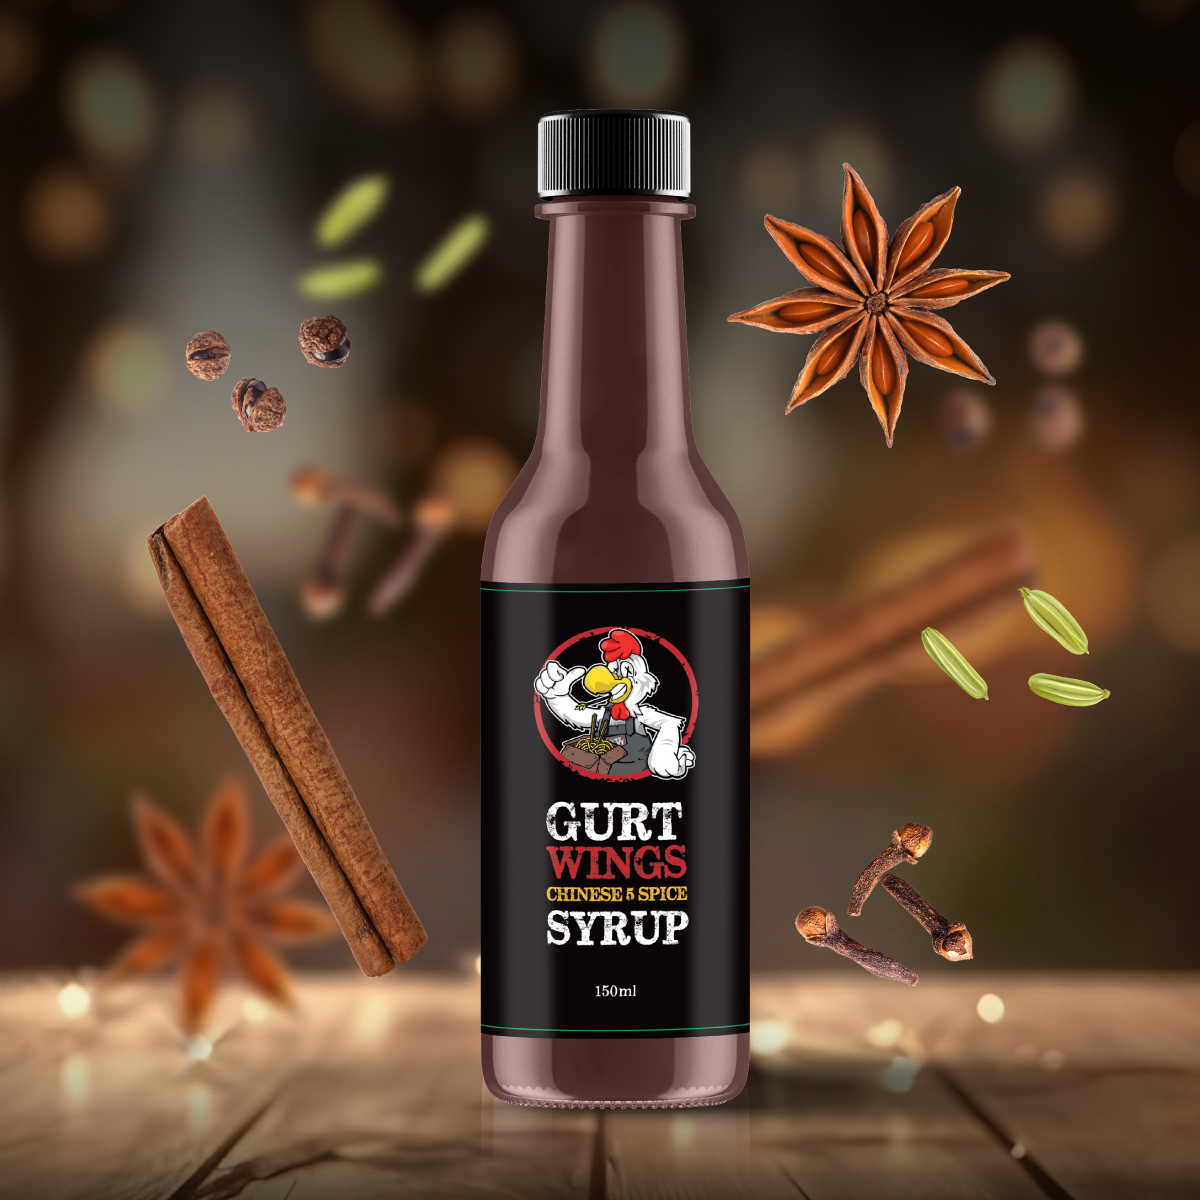 gurt wings Chinese 5 spice syrup